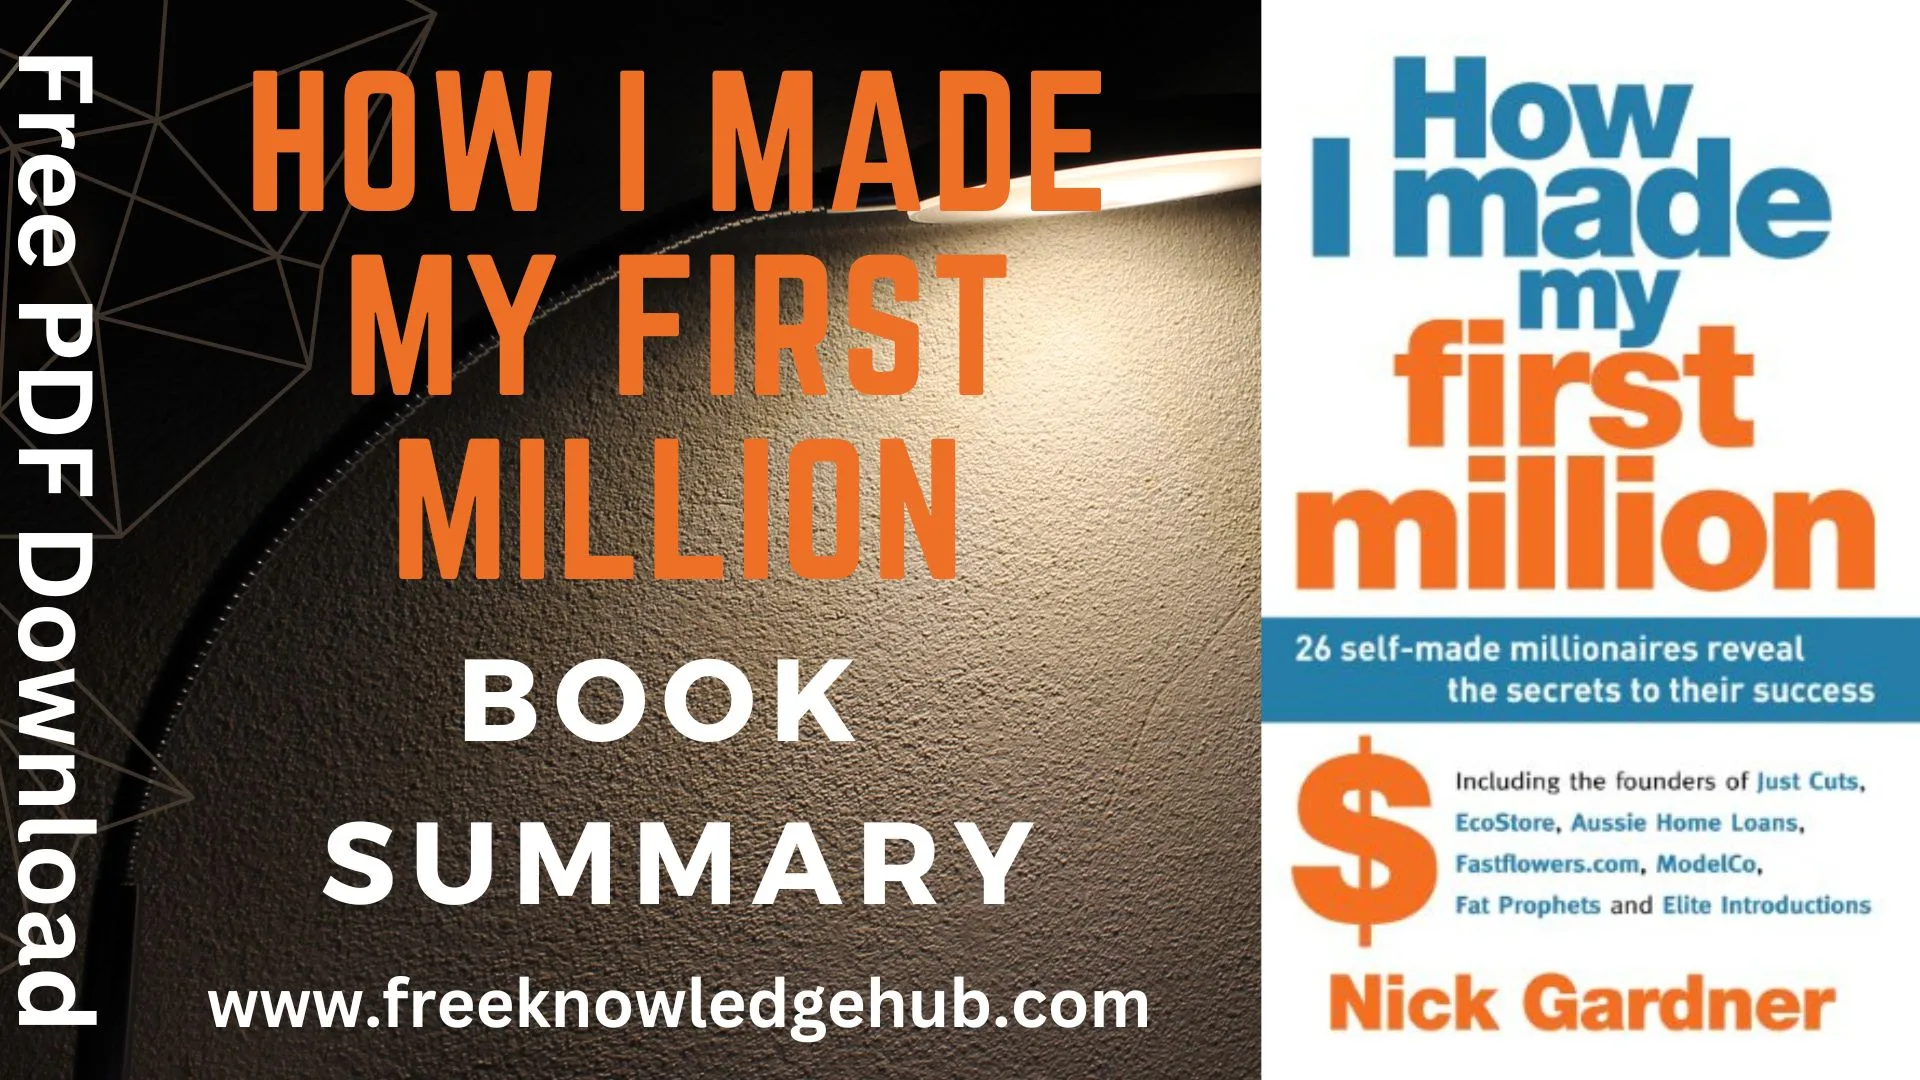 How I made My First Million book summary free download